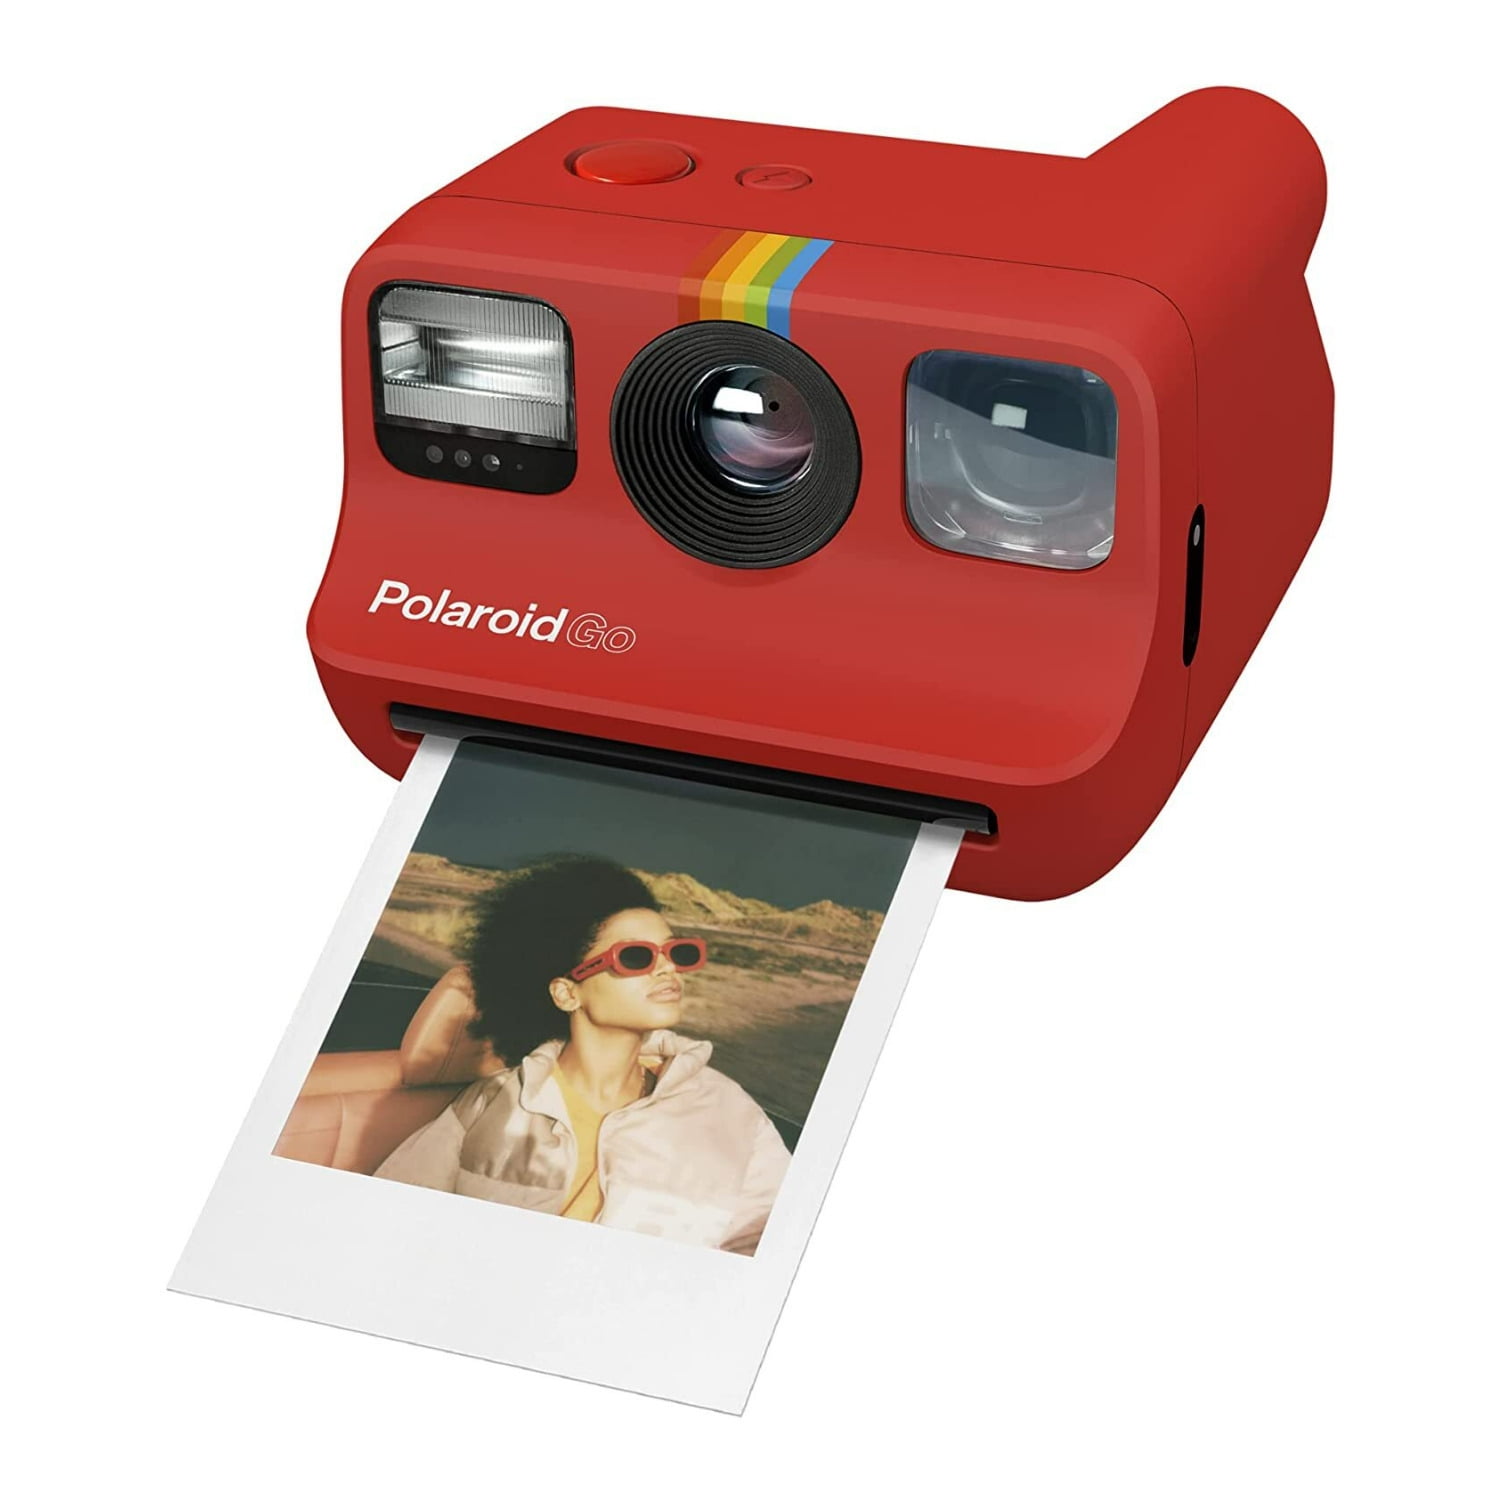 Polaroid Go Generation 2 Instant Film Camera Bundle with Polaroid GO Color  Film, Double Pack and Photo Album for Instax Prints + Cloth (4 Items) (Red)